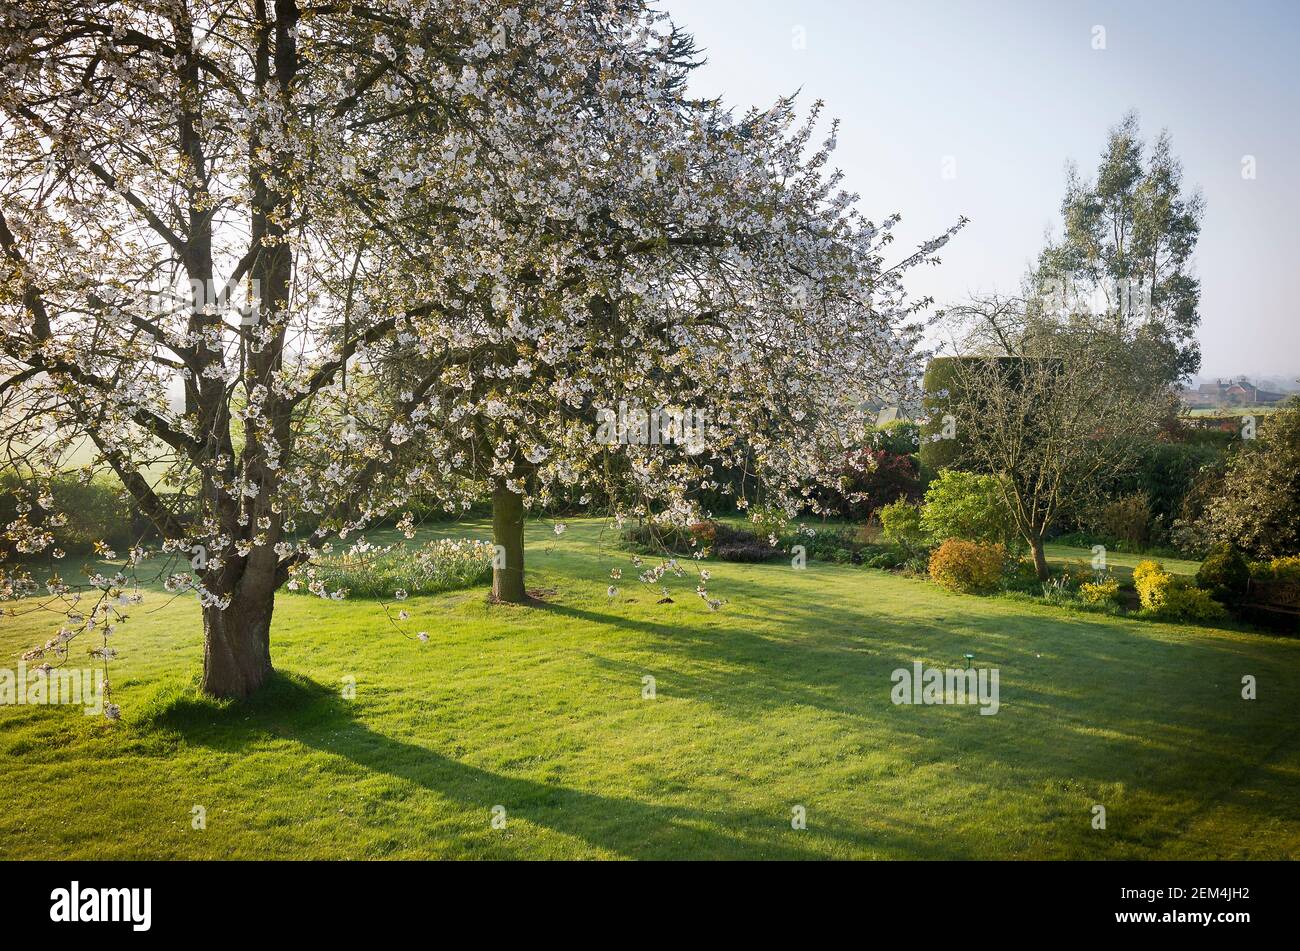 Early morning sunshine illuminates the grass lawn and the flowering Wild Cherry tree in blossom in an English garden in April Stock Photo